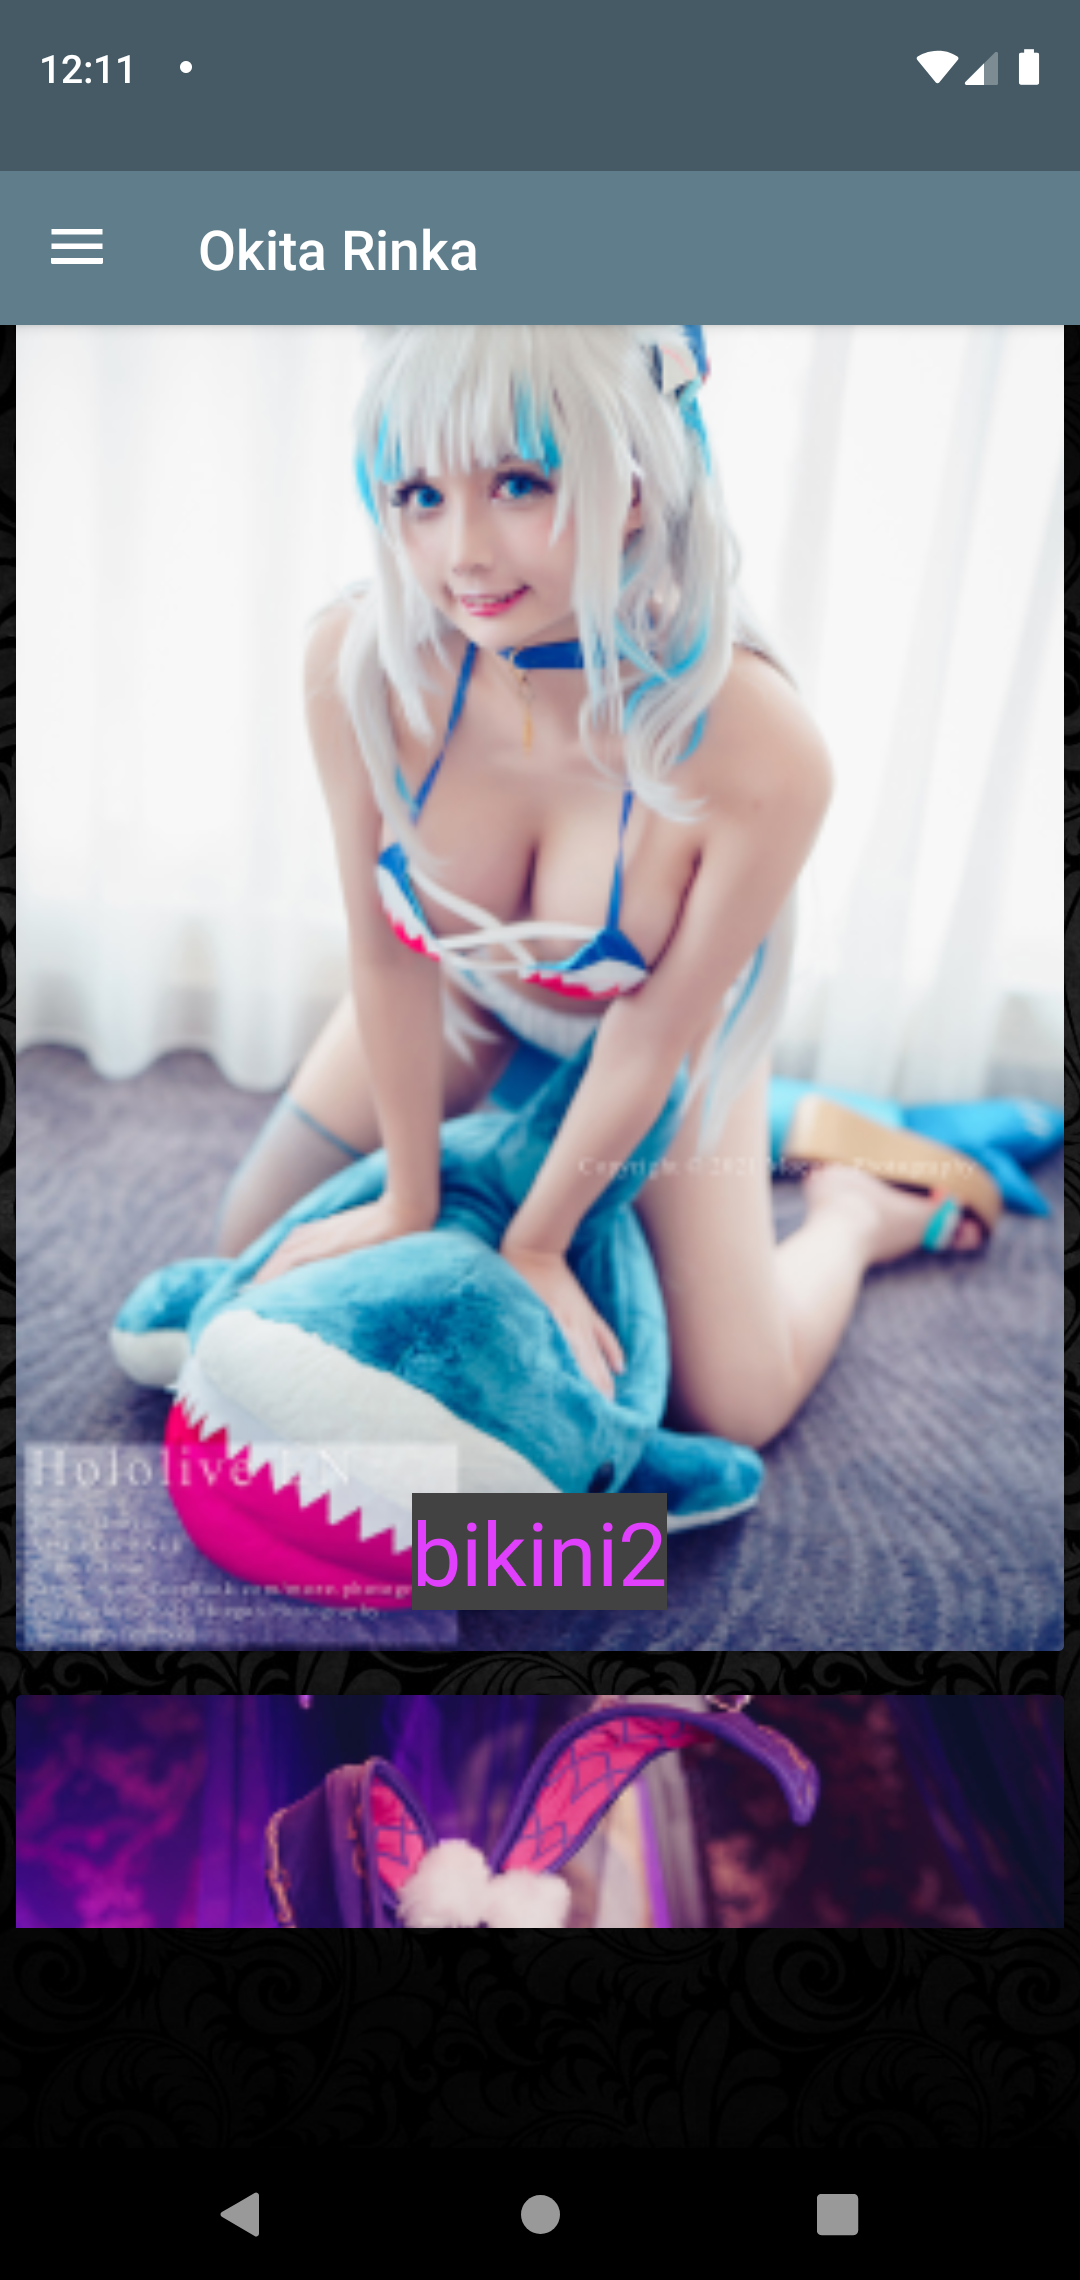 Okita Rinka Pictues henati,gallery,pics,asian,cosplay,hentai,henatai,apk,app,gag,softcore,android,porn,photos,erotic,sexy,pictures,apps,photo,download,comics,girl,collection,star